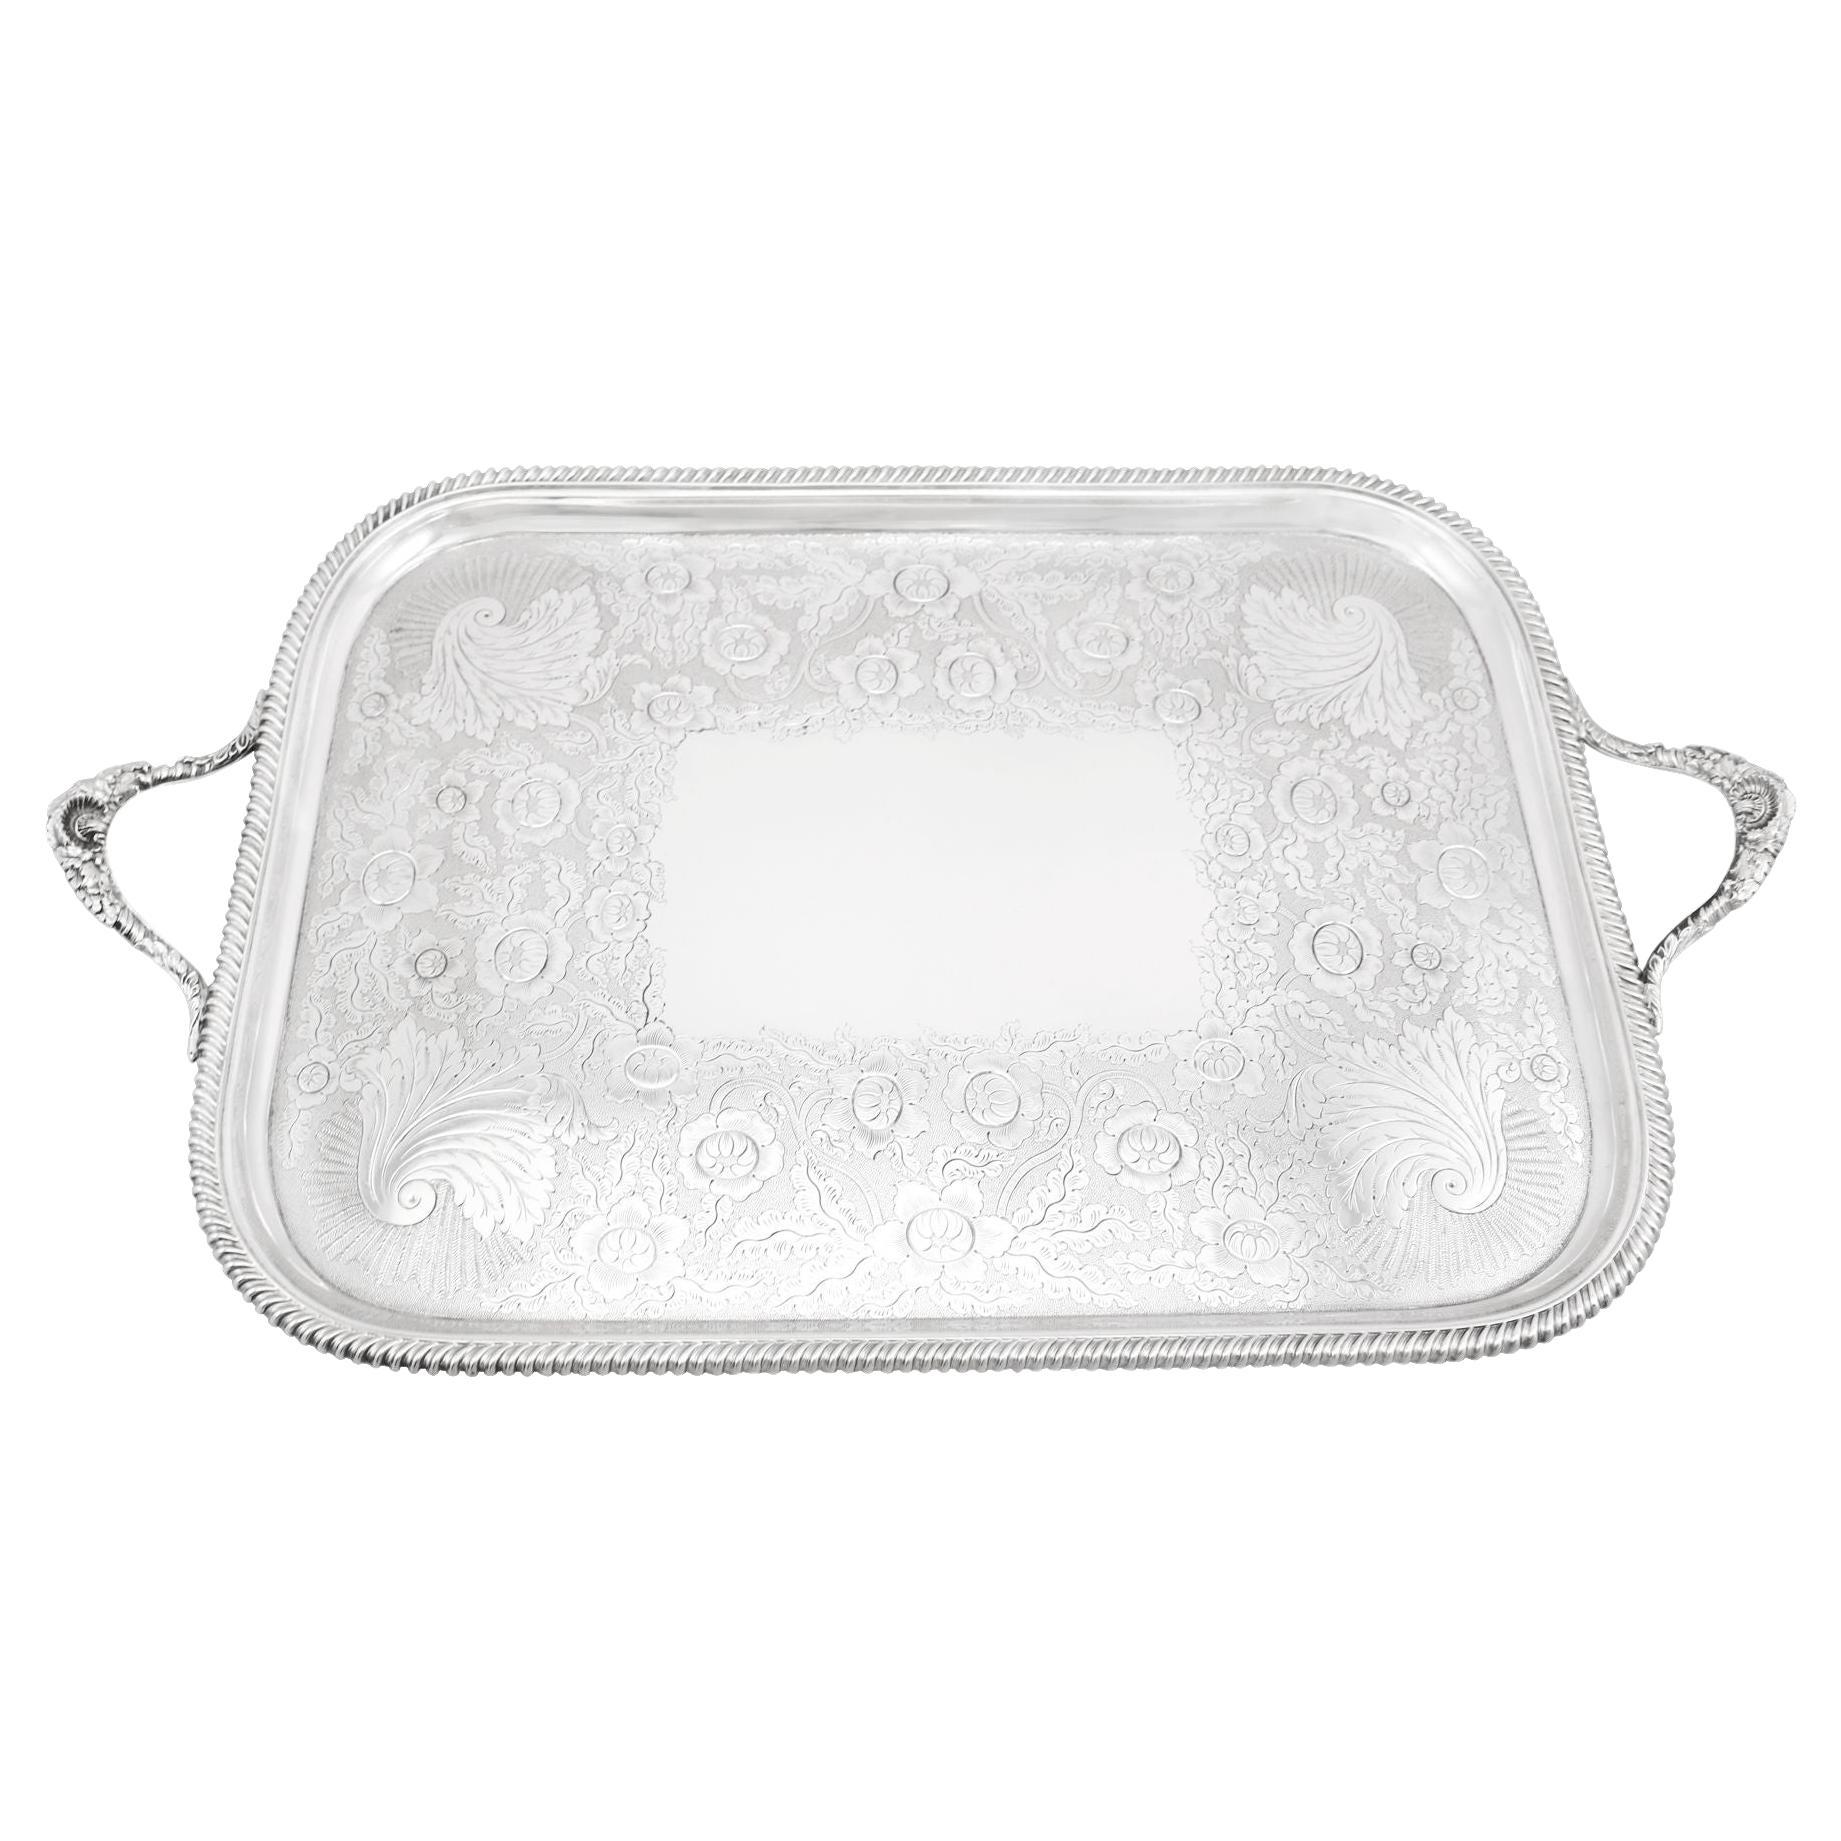 Antique Victorian Sterling Silver Tray by Thomas Bradbury & Sons